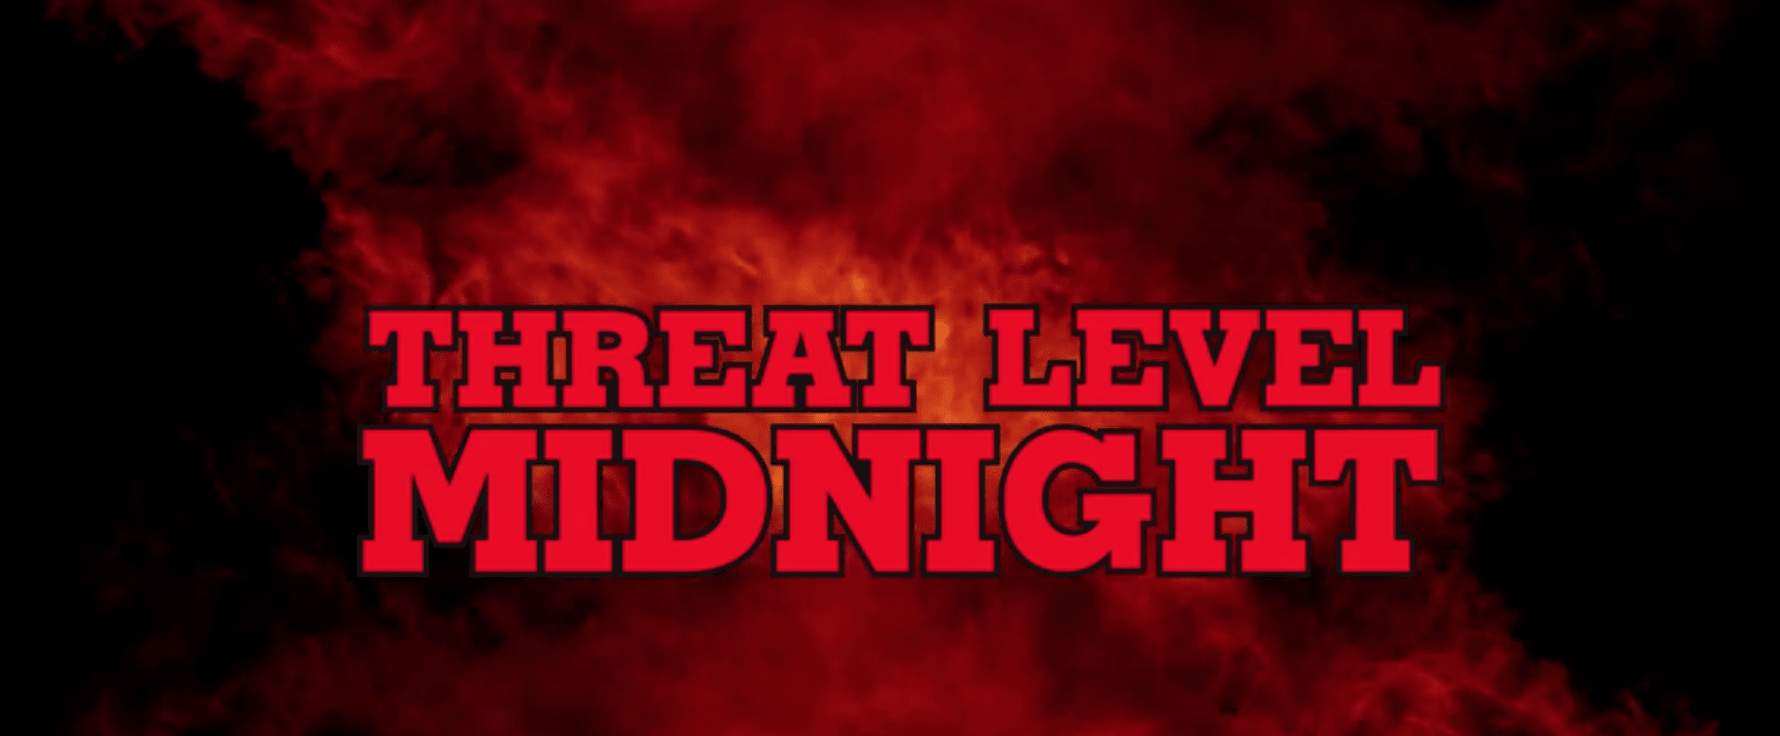 Highlights from Threat Level Midnight!!